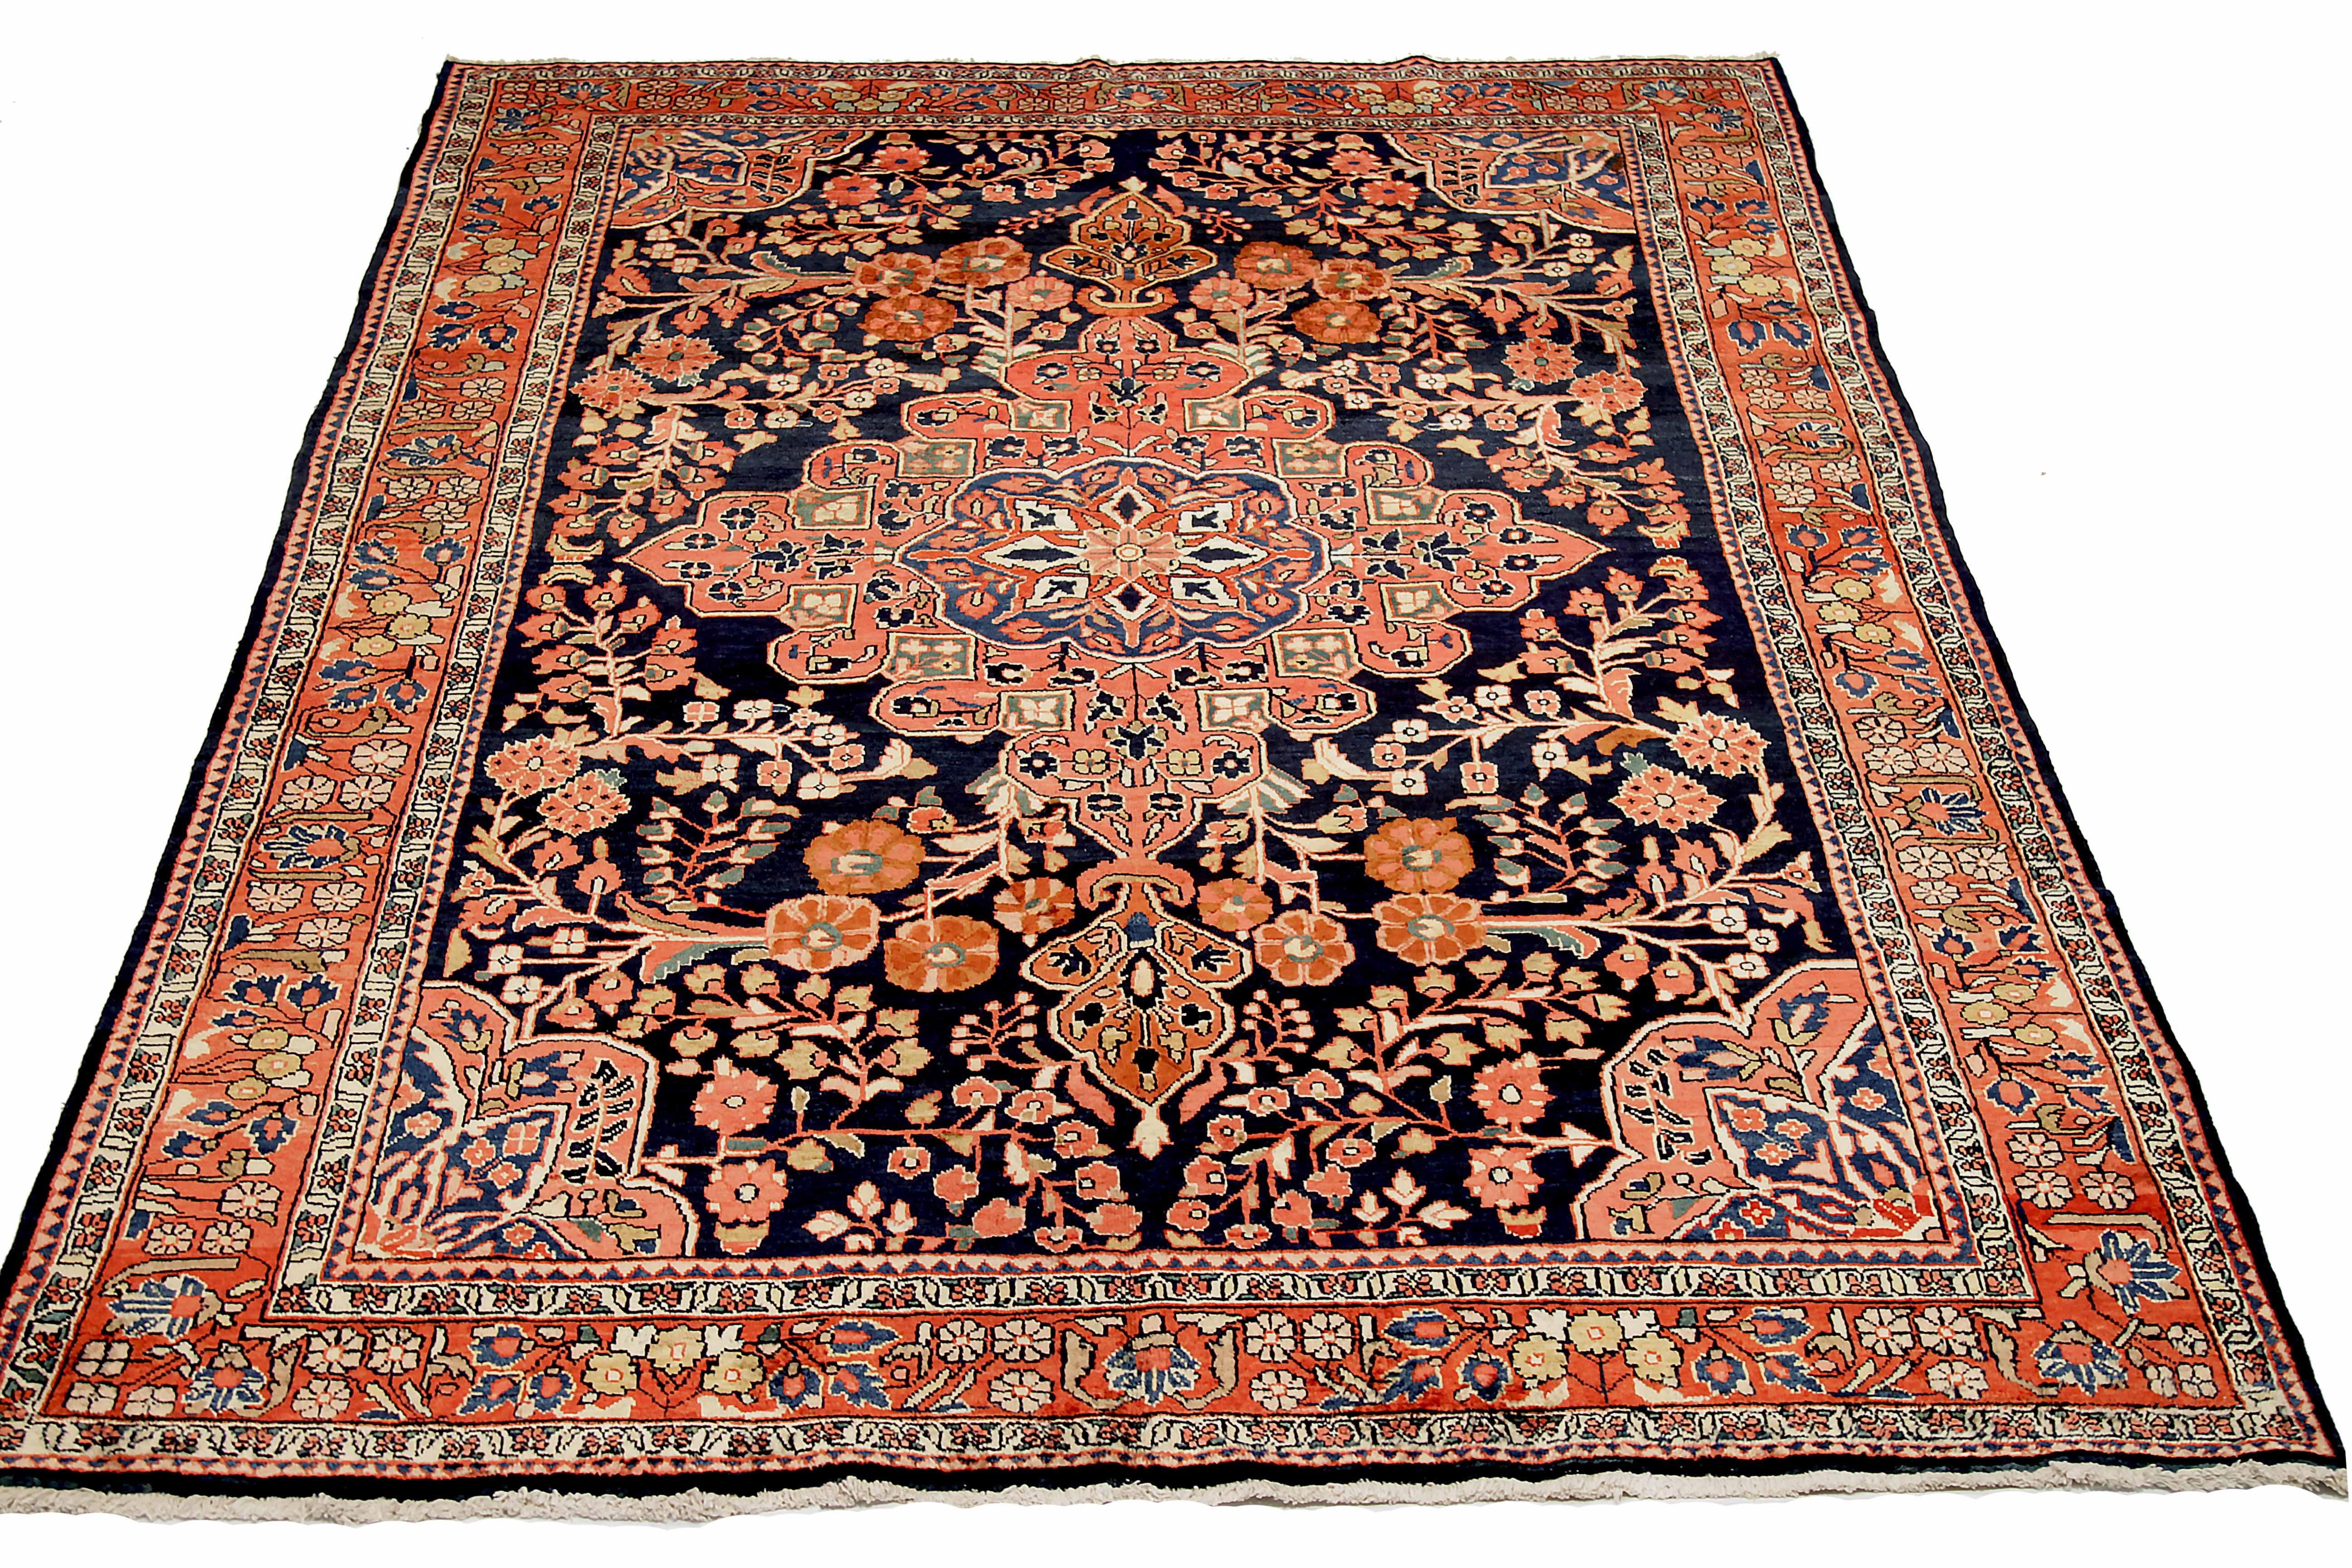 Vintage Persian Area Rug, expertly handwoven from premium sheep's wool and colored with all-natural vegetable dyes, is safe for humans and pets. This traditional Mahal design, with its beautiful ornate floral motifs, adds a touch of elegance to any